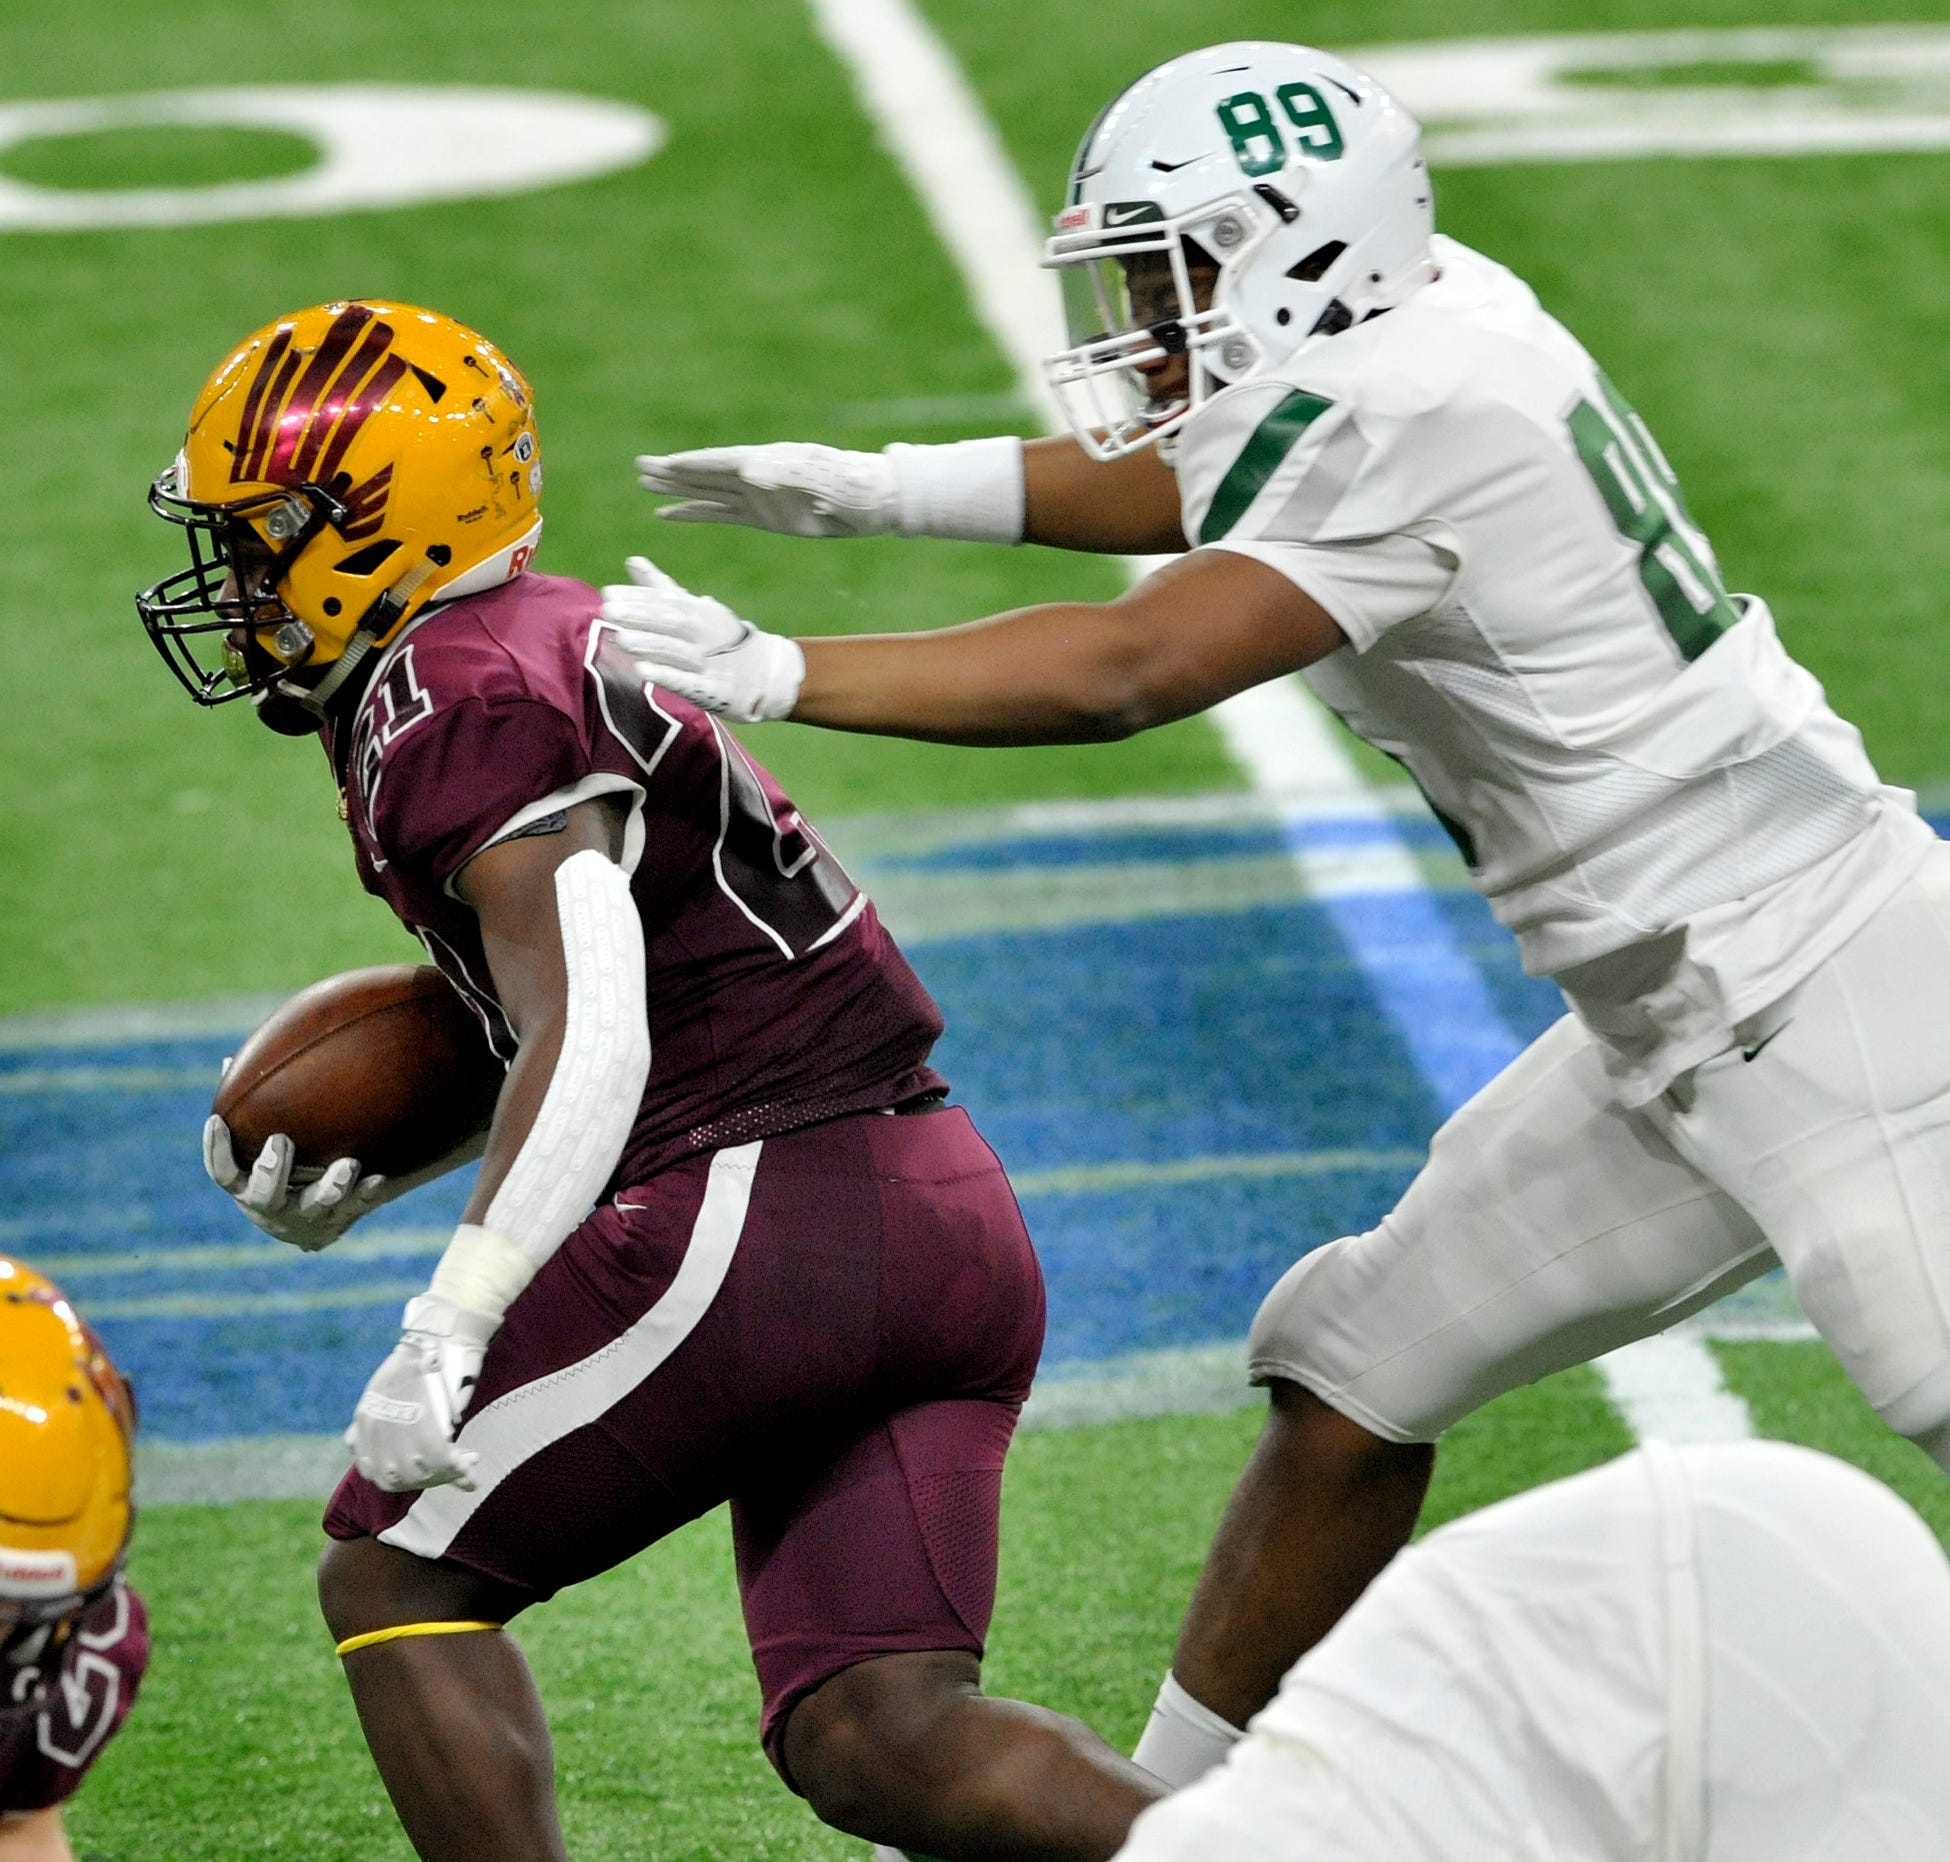 Davison's Jay'len Flowers (21) runs after catching a pass as he tackled by West Bloomfield's Brandon Davis Swain (89) near the end of the game.